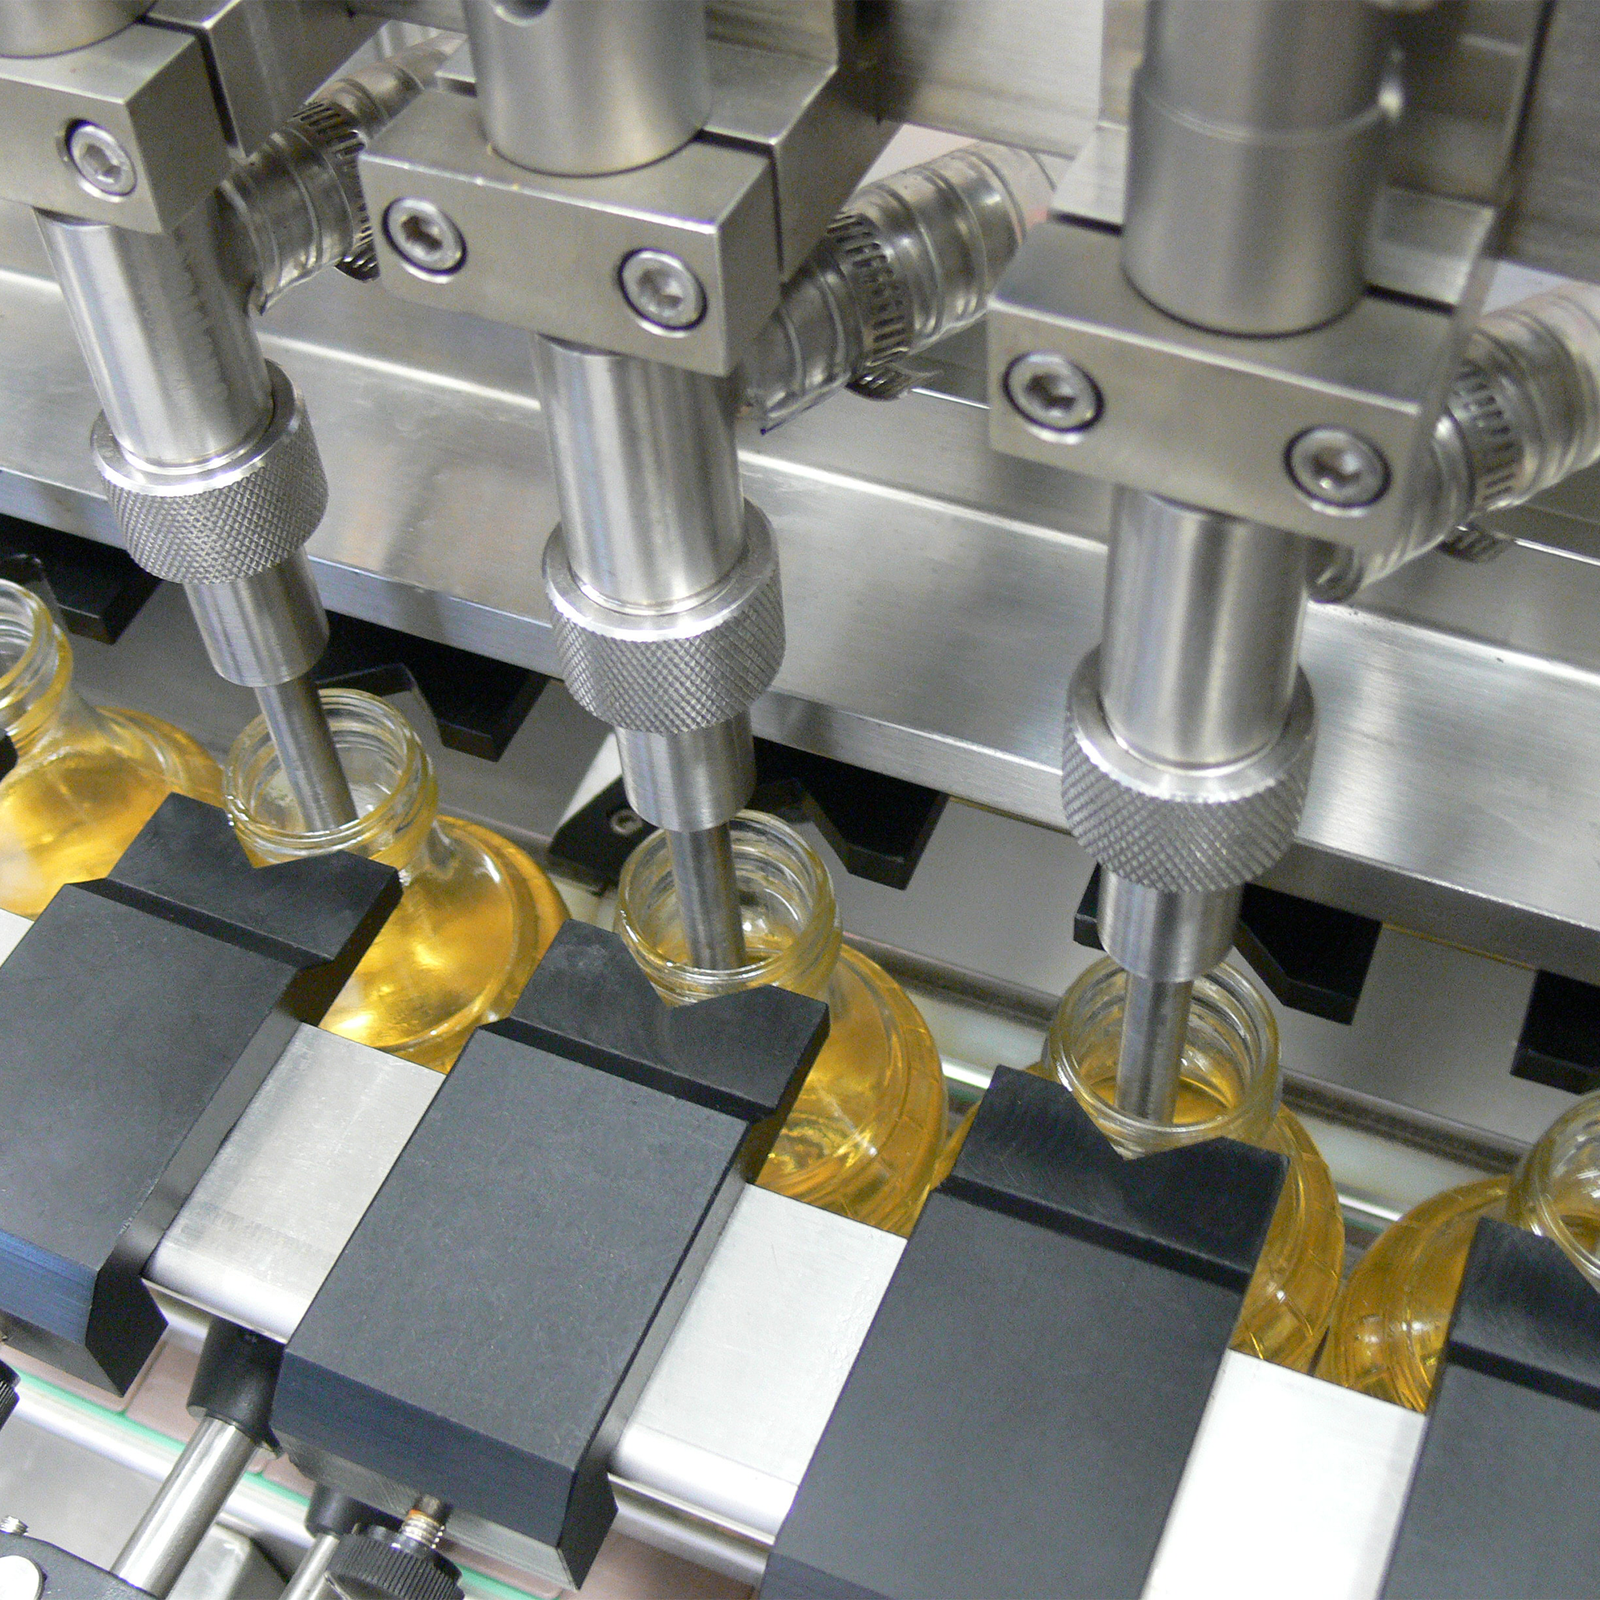 closeup of 3 dispensing heads on a low viscosity liquid filling machine dispensing liquid into clear containers